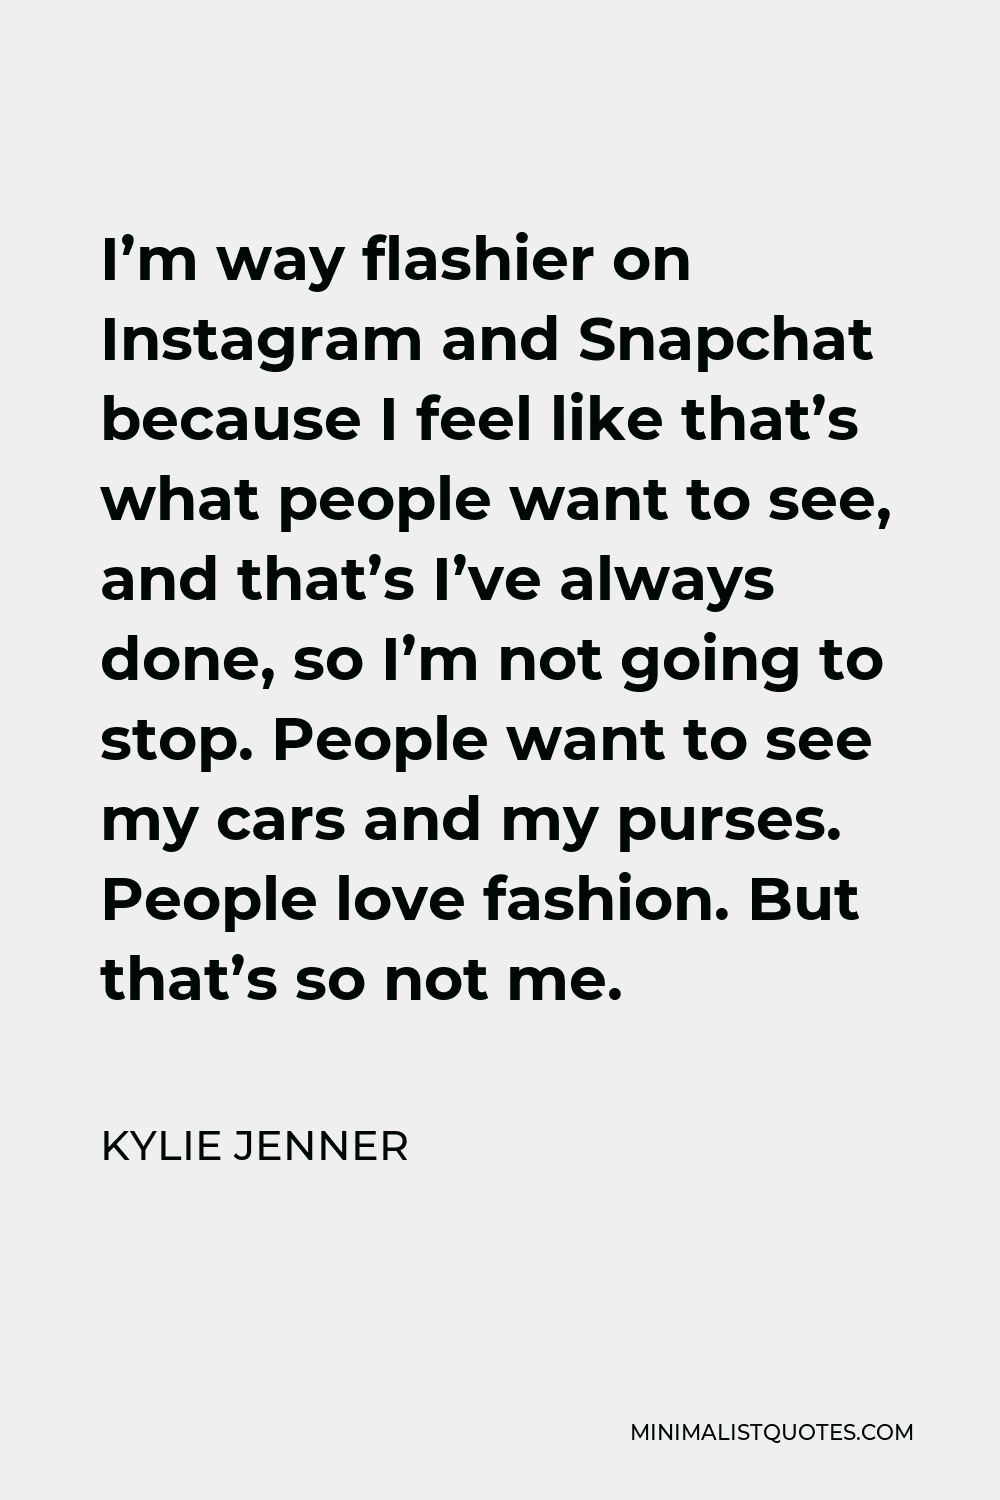 Kylie Jenner Quote - I’m way flashier on Instagram and Snapchat because I feel like that’s what people want to see, and that’s I’ve always done, so I’m not going to stop. People want to see my cars and my purses. People love fashion. But that’s so not me.